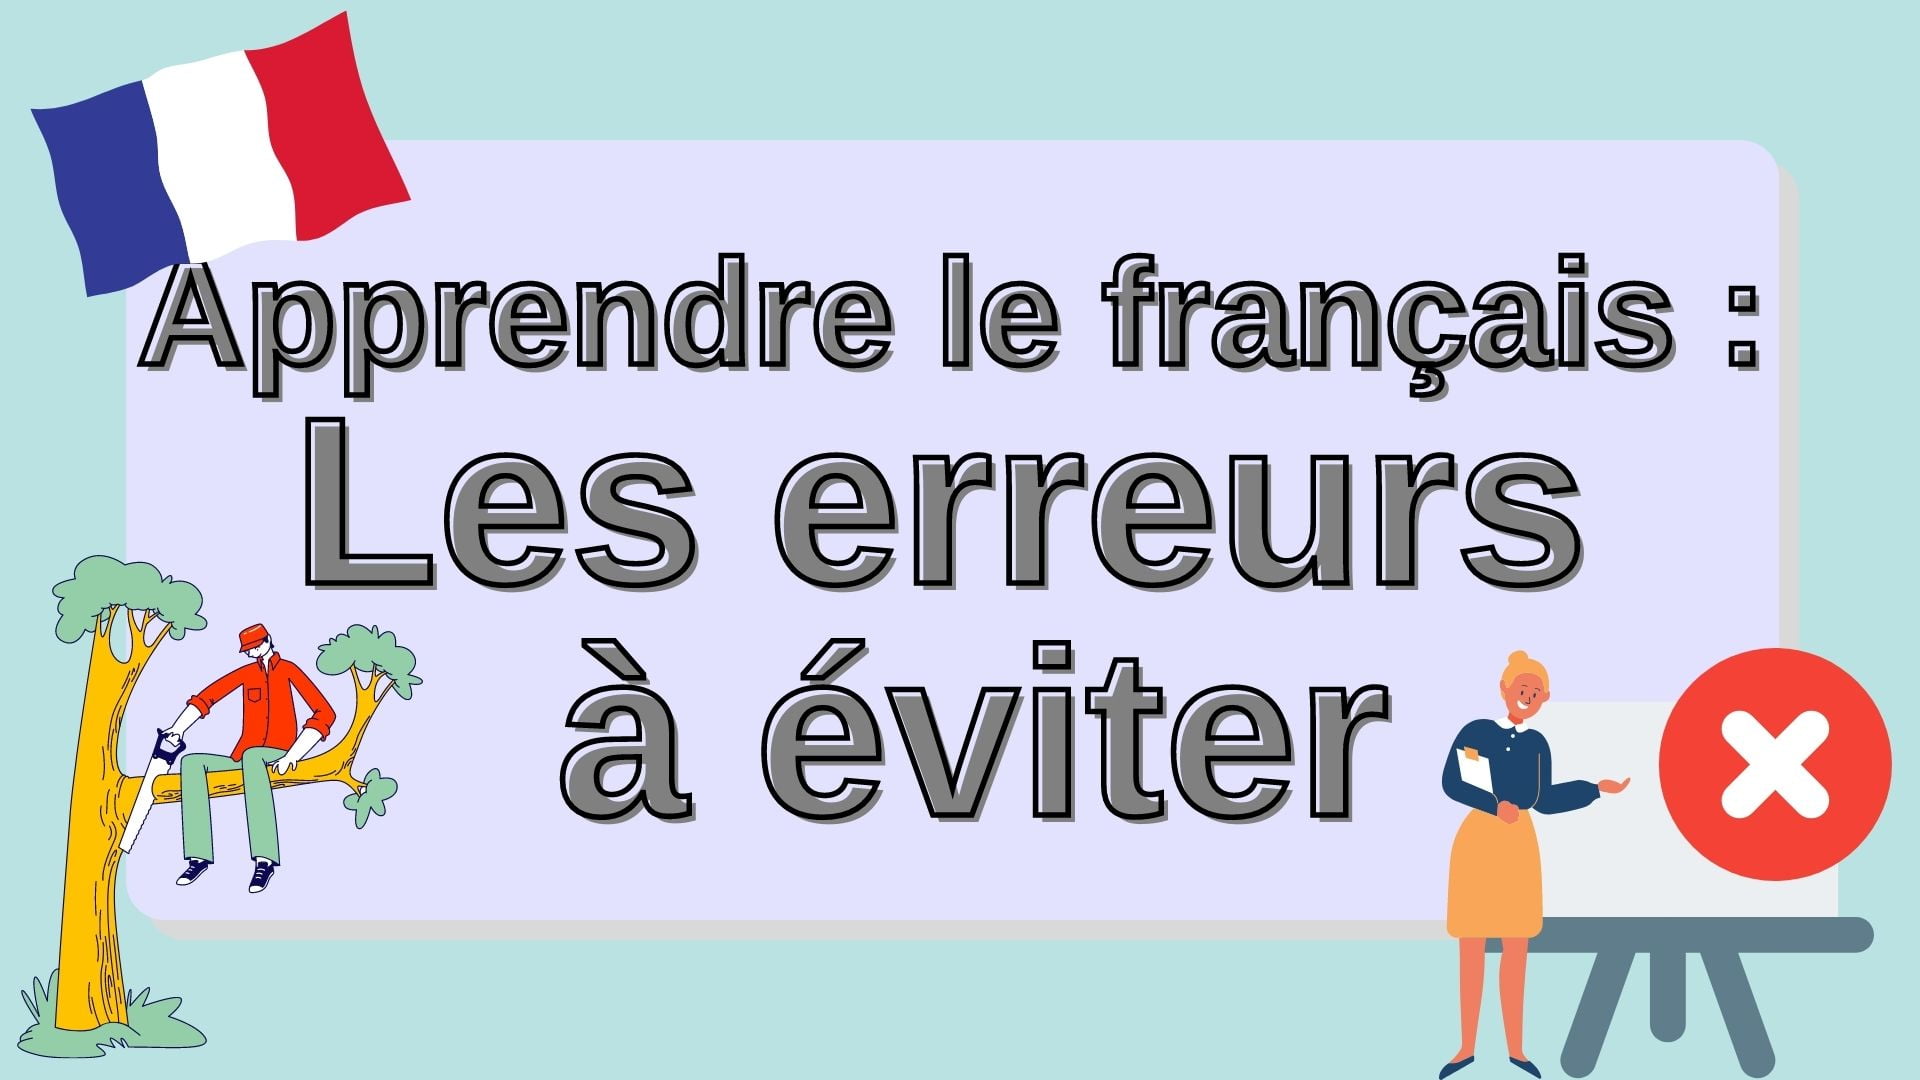 Study mistakes to avoid when learning French